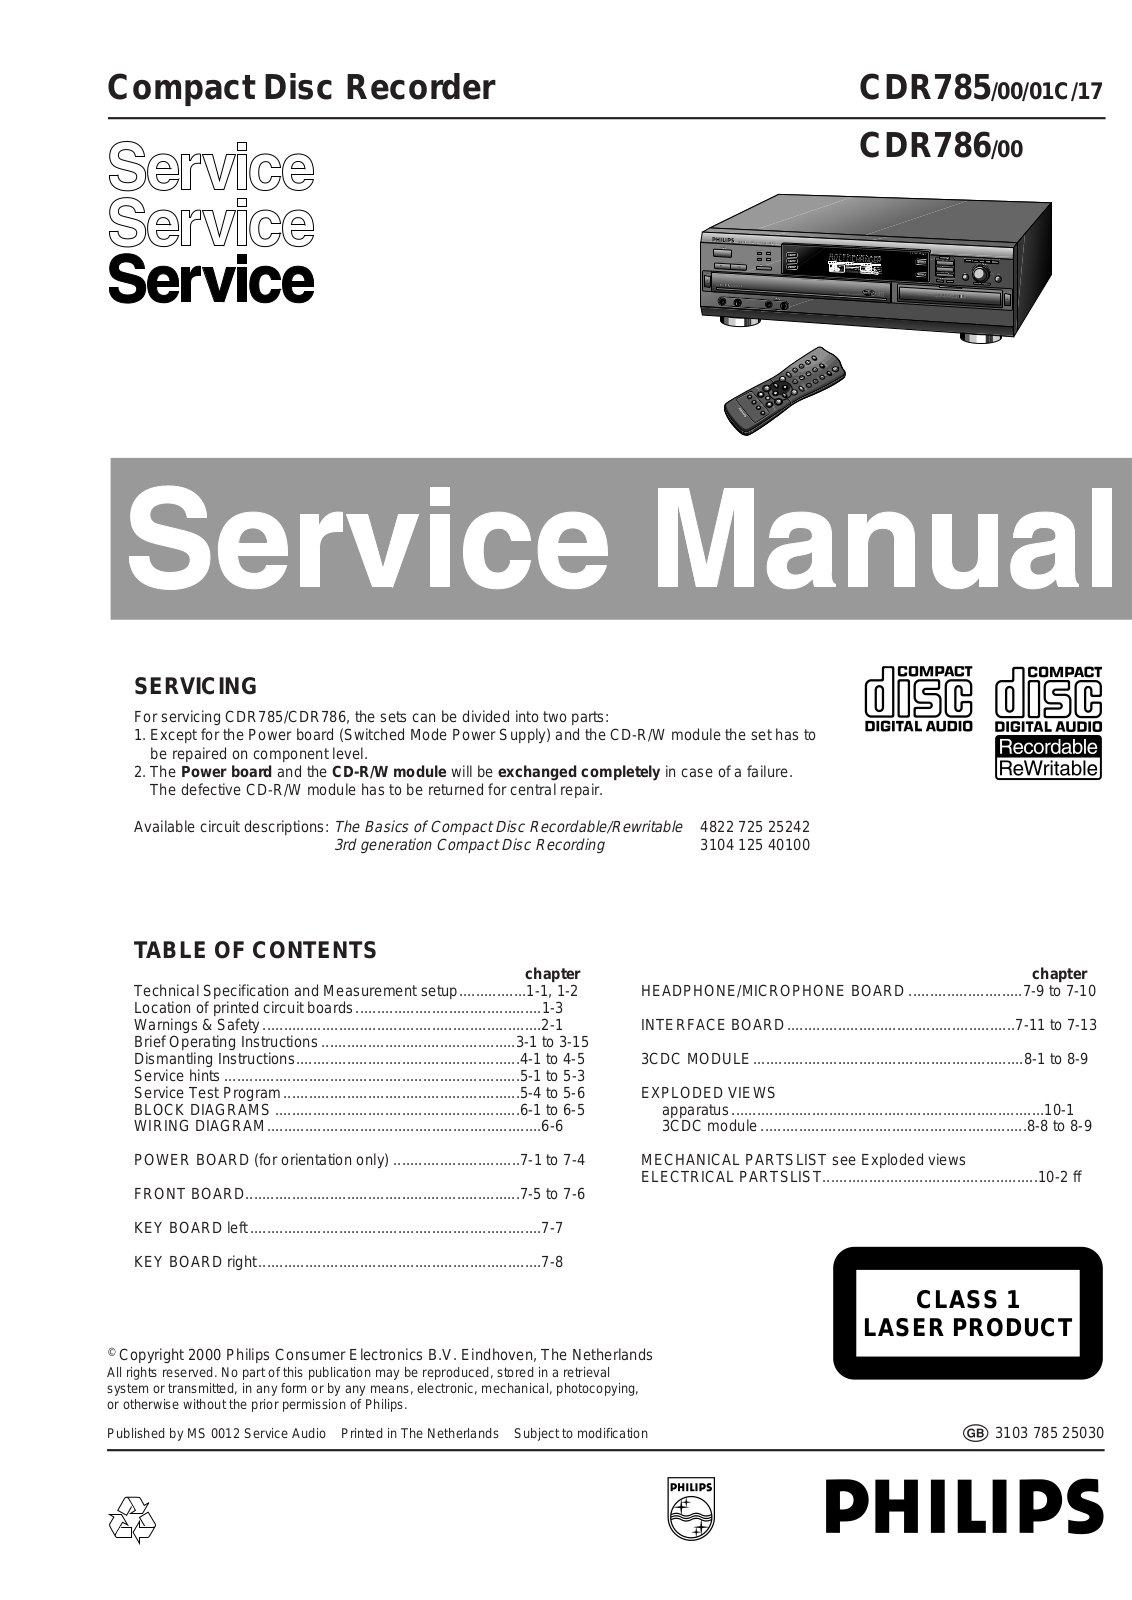 Philips CDR785-00, CDR785-01C, CDR785-17, CDR786-00 Service Manual